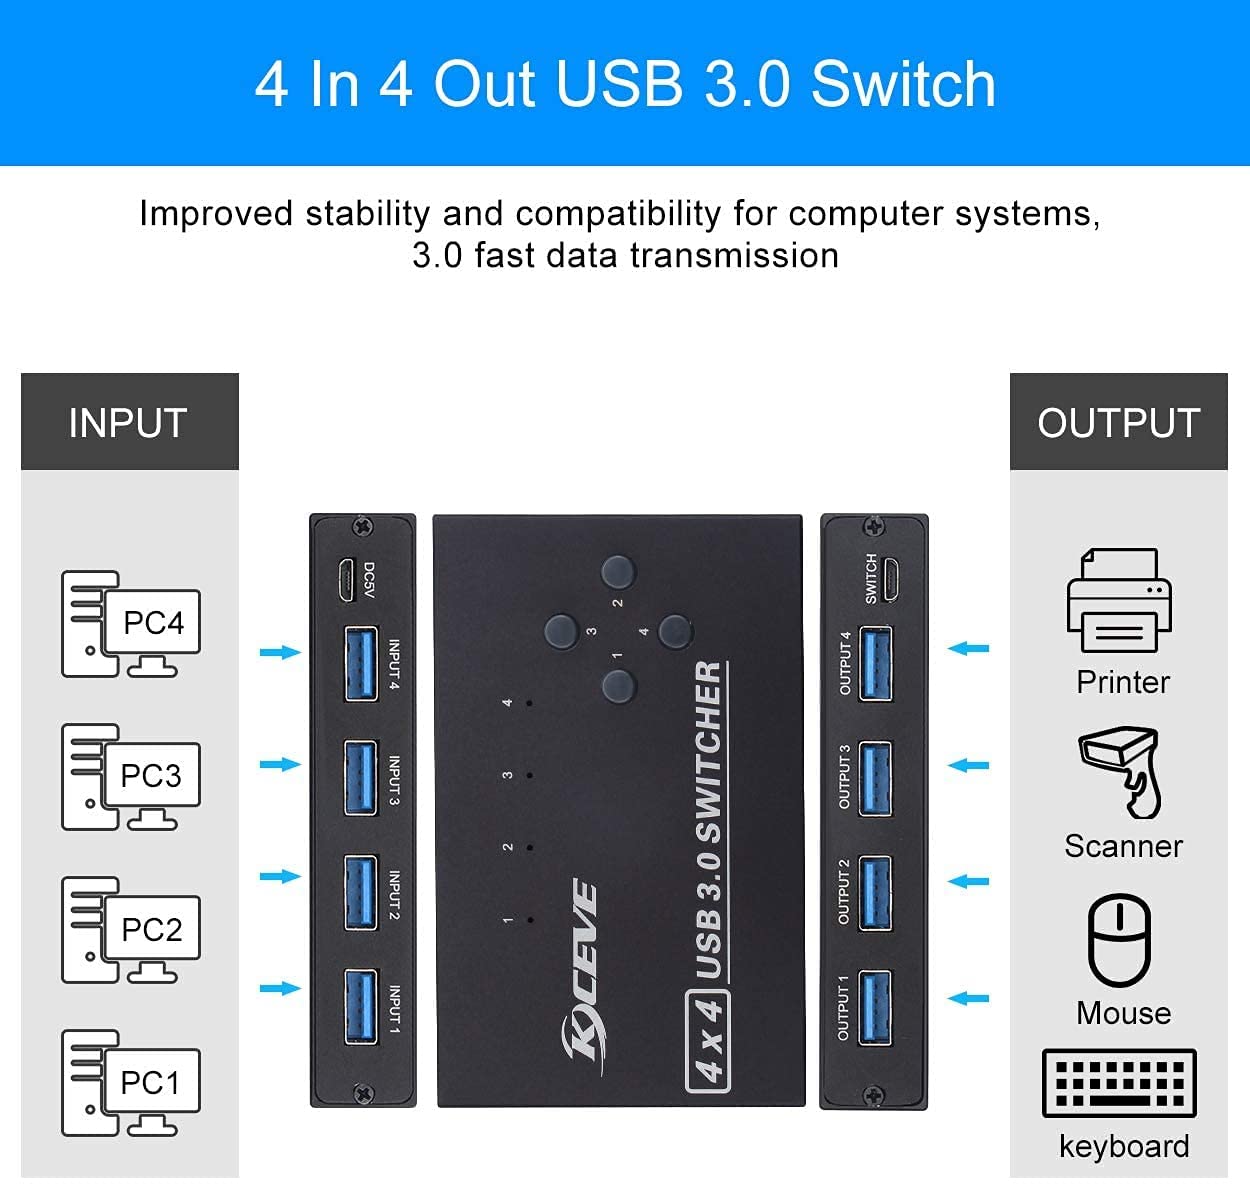 Close-up of KCEVE USB 3.0 Switch buttons and ports